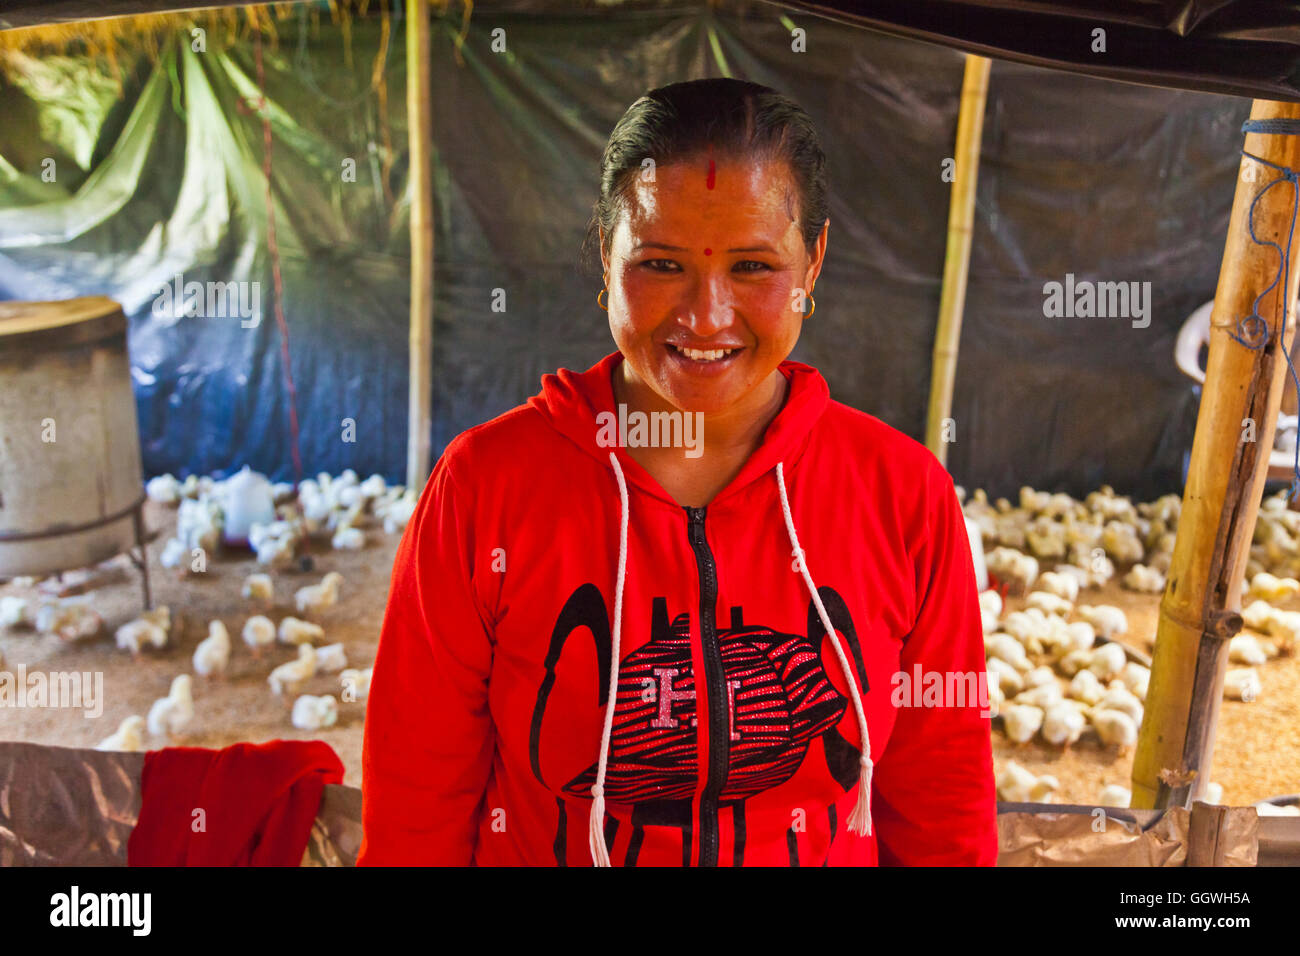 A microcredit loan was used to purchased baby chicks for a farmer in THOKA VILLAGE - KATHMANDU, NEPAL Stock Photo